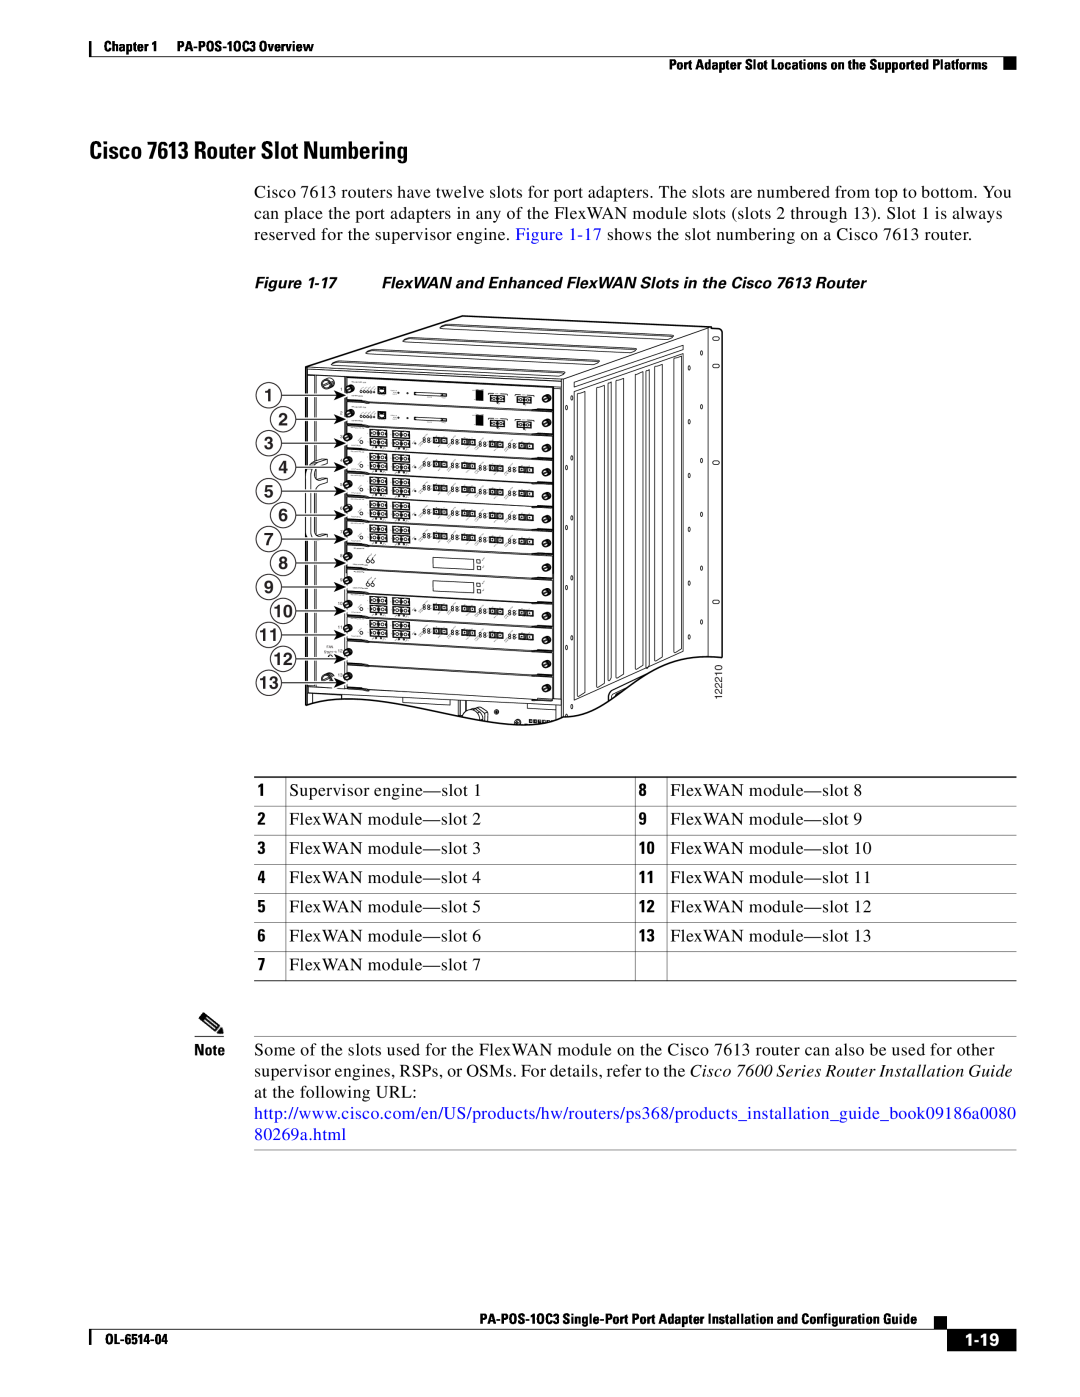 Cisco Systems PA-POS-1OC3, PA-POS-2OC3 manual Cisco 7613 Router Slot Numbering, 1-19, Status 